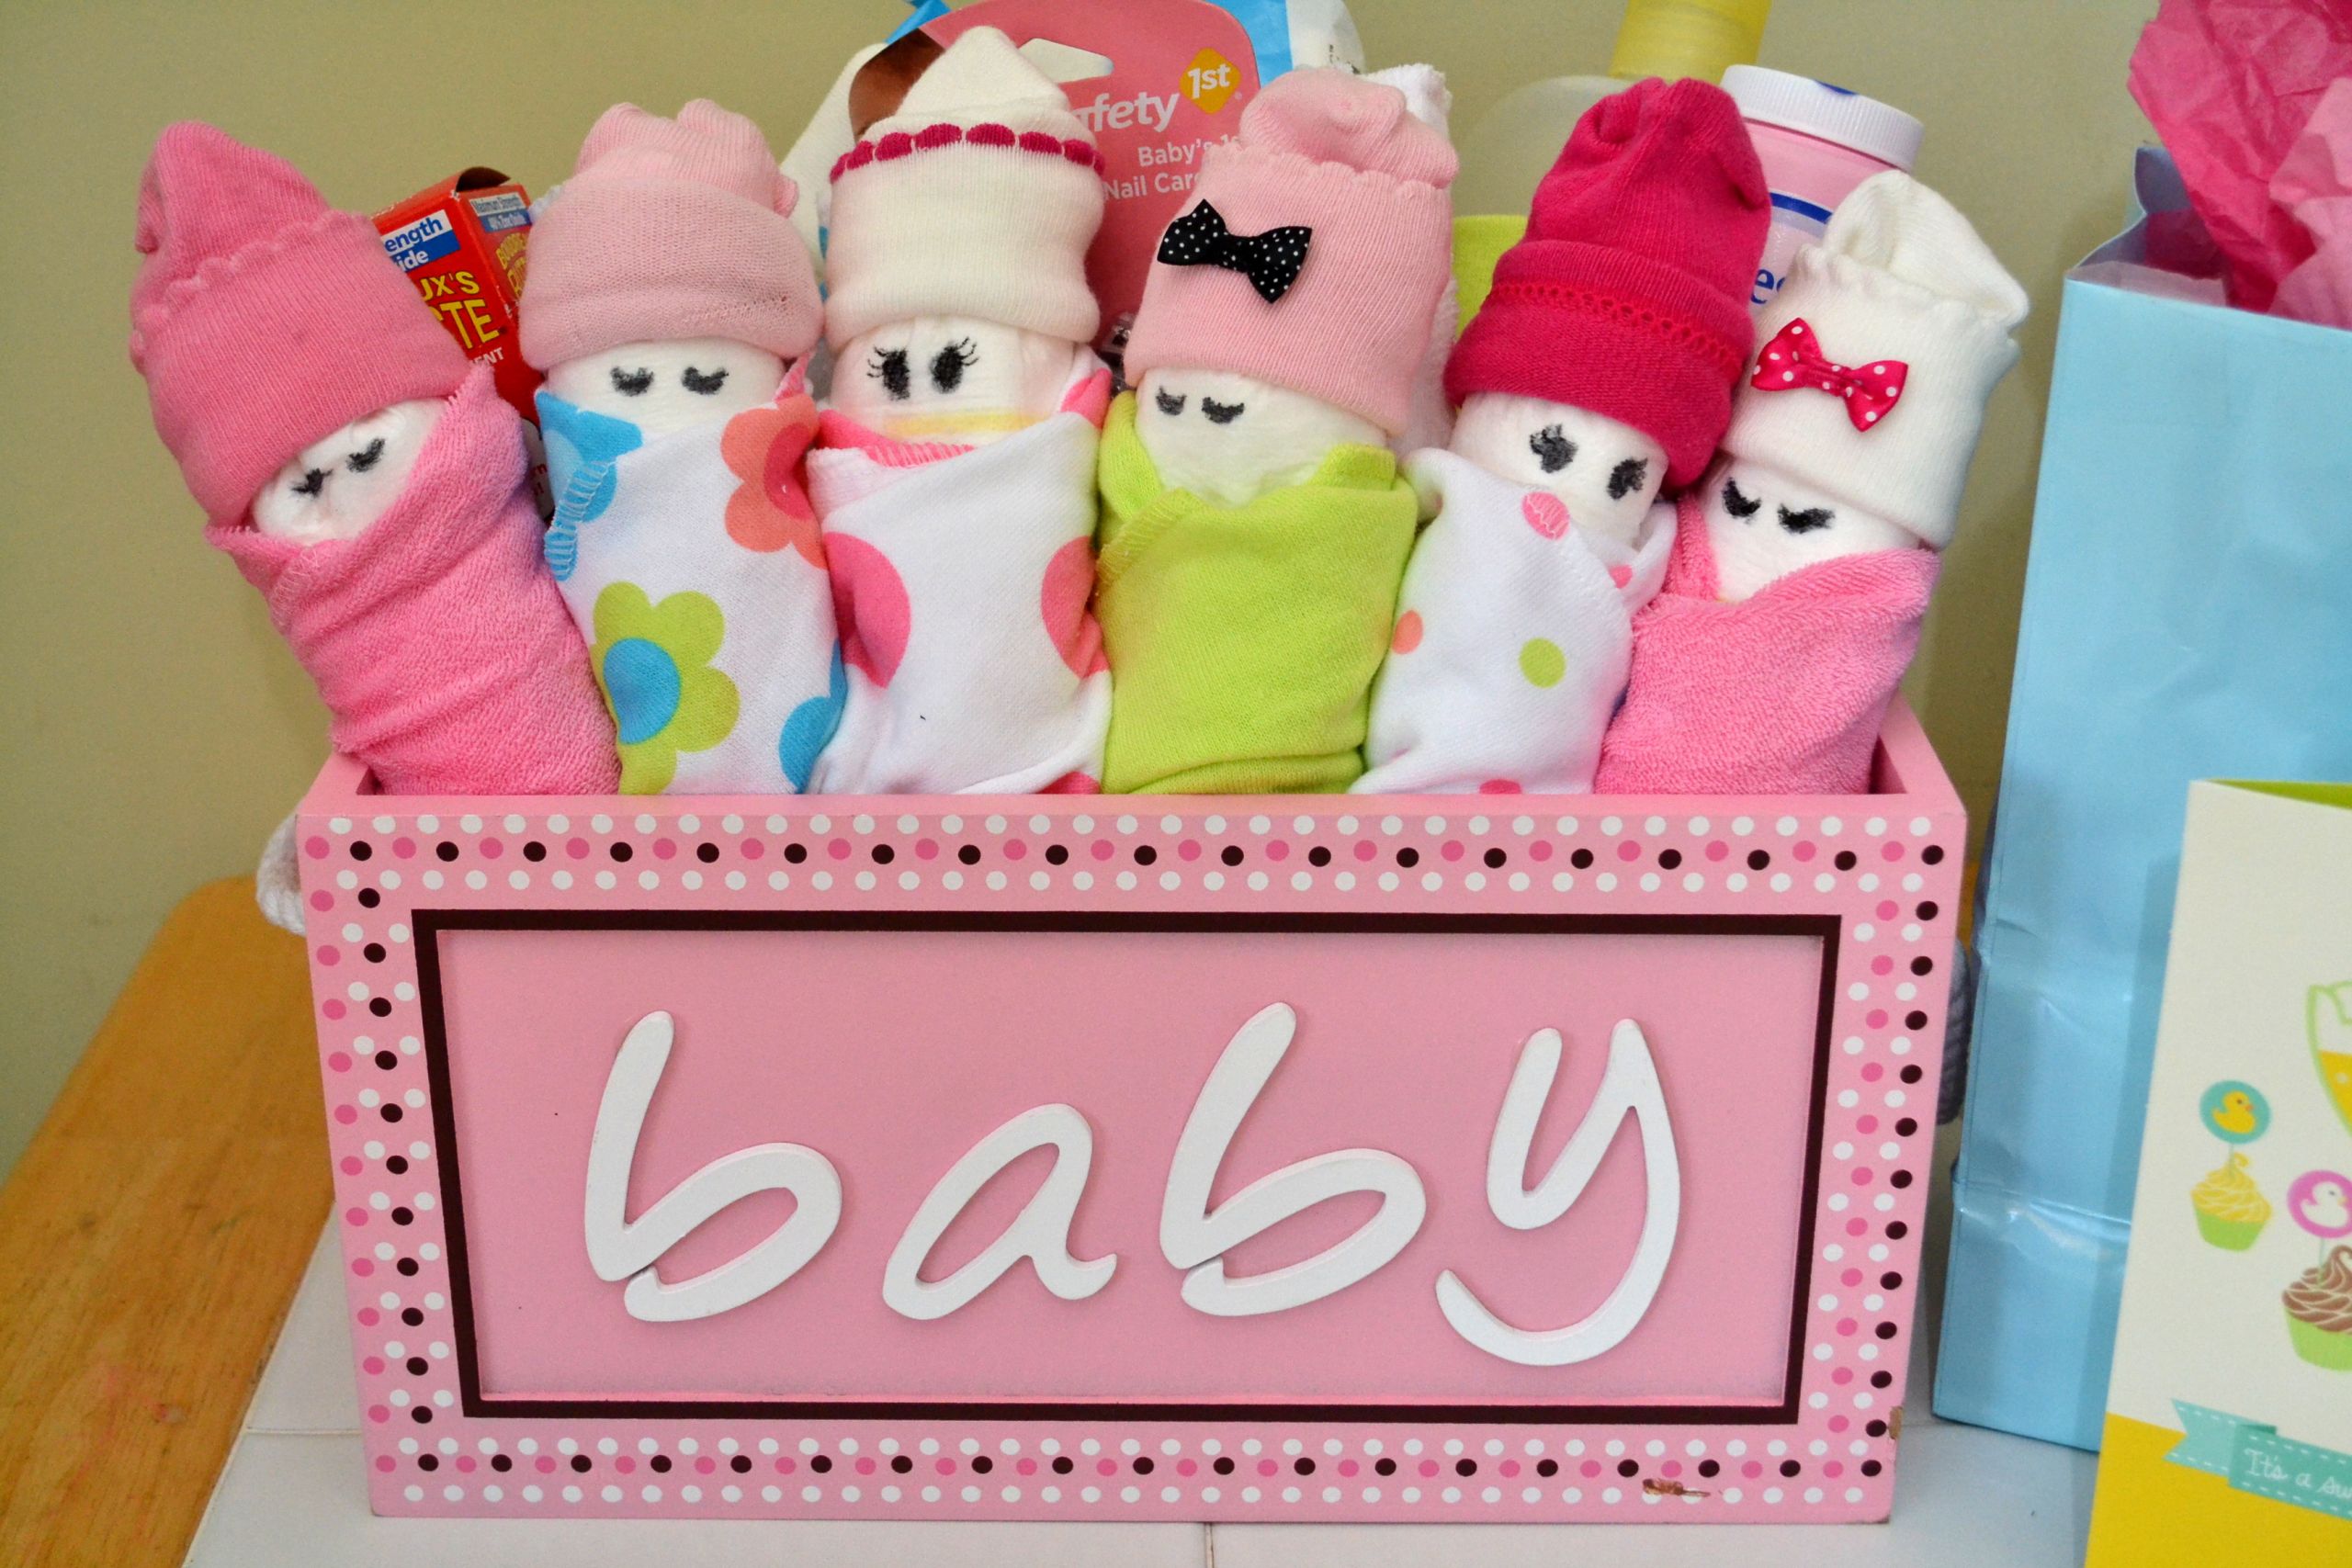 DIY Baby Shower Gifts Ideas
 Essential Baby Shower Gifts & DIY Diaper Babies